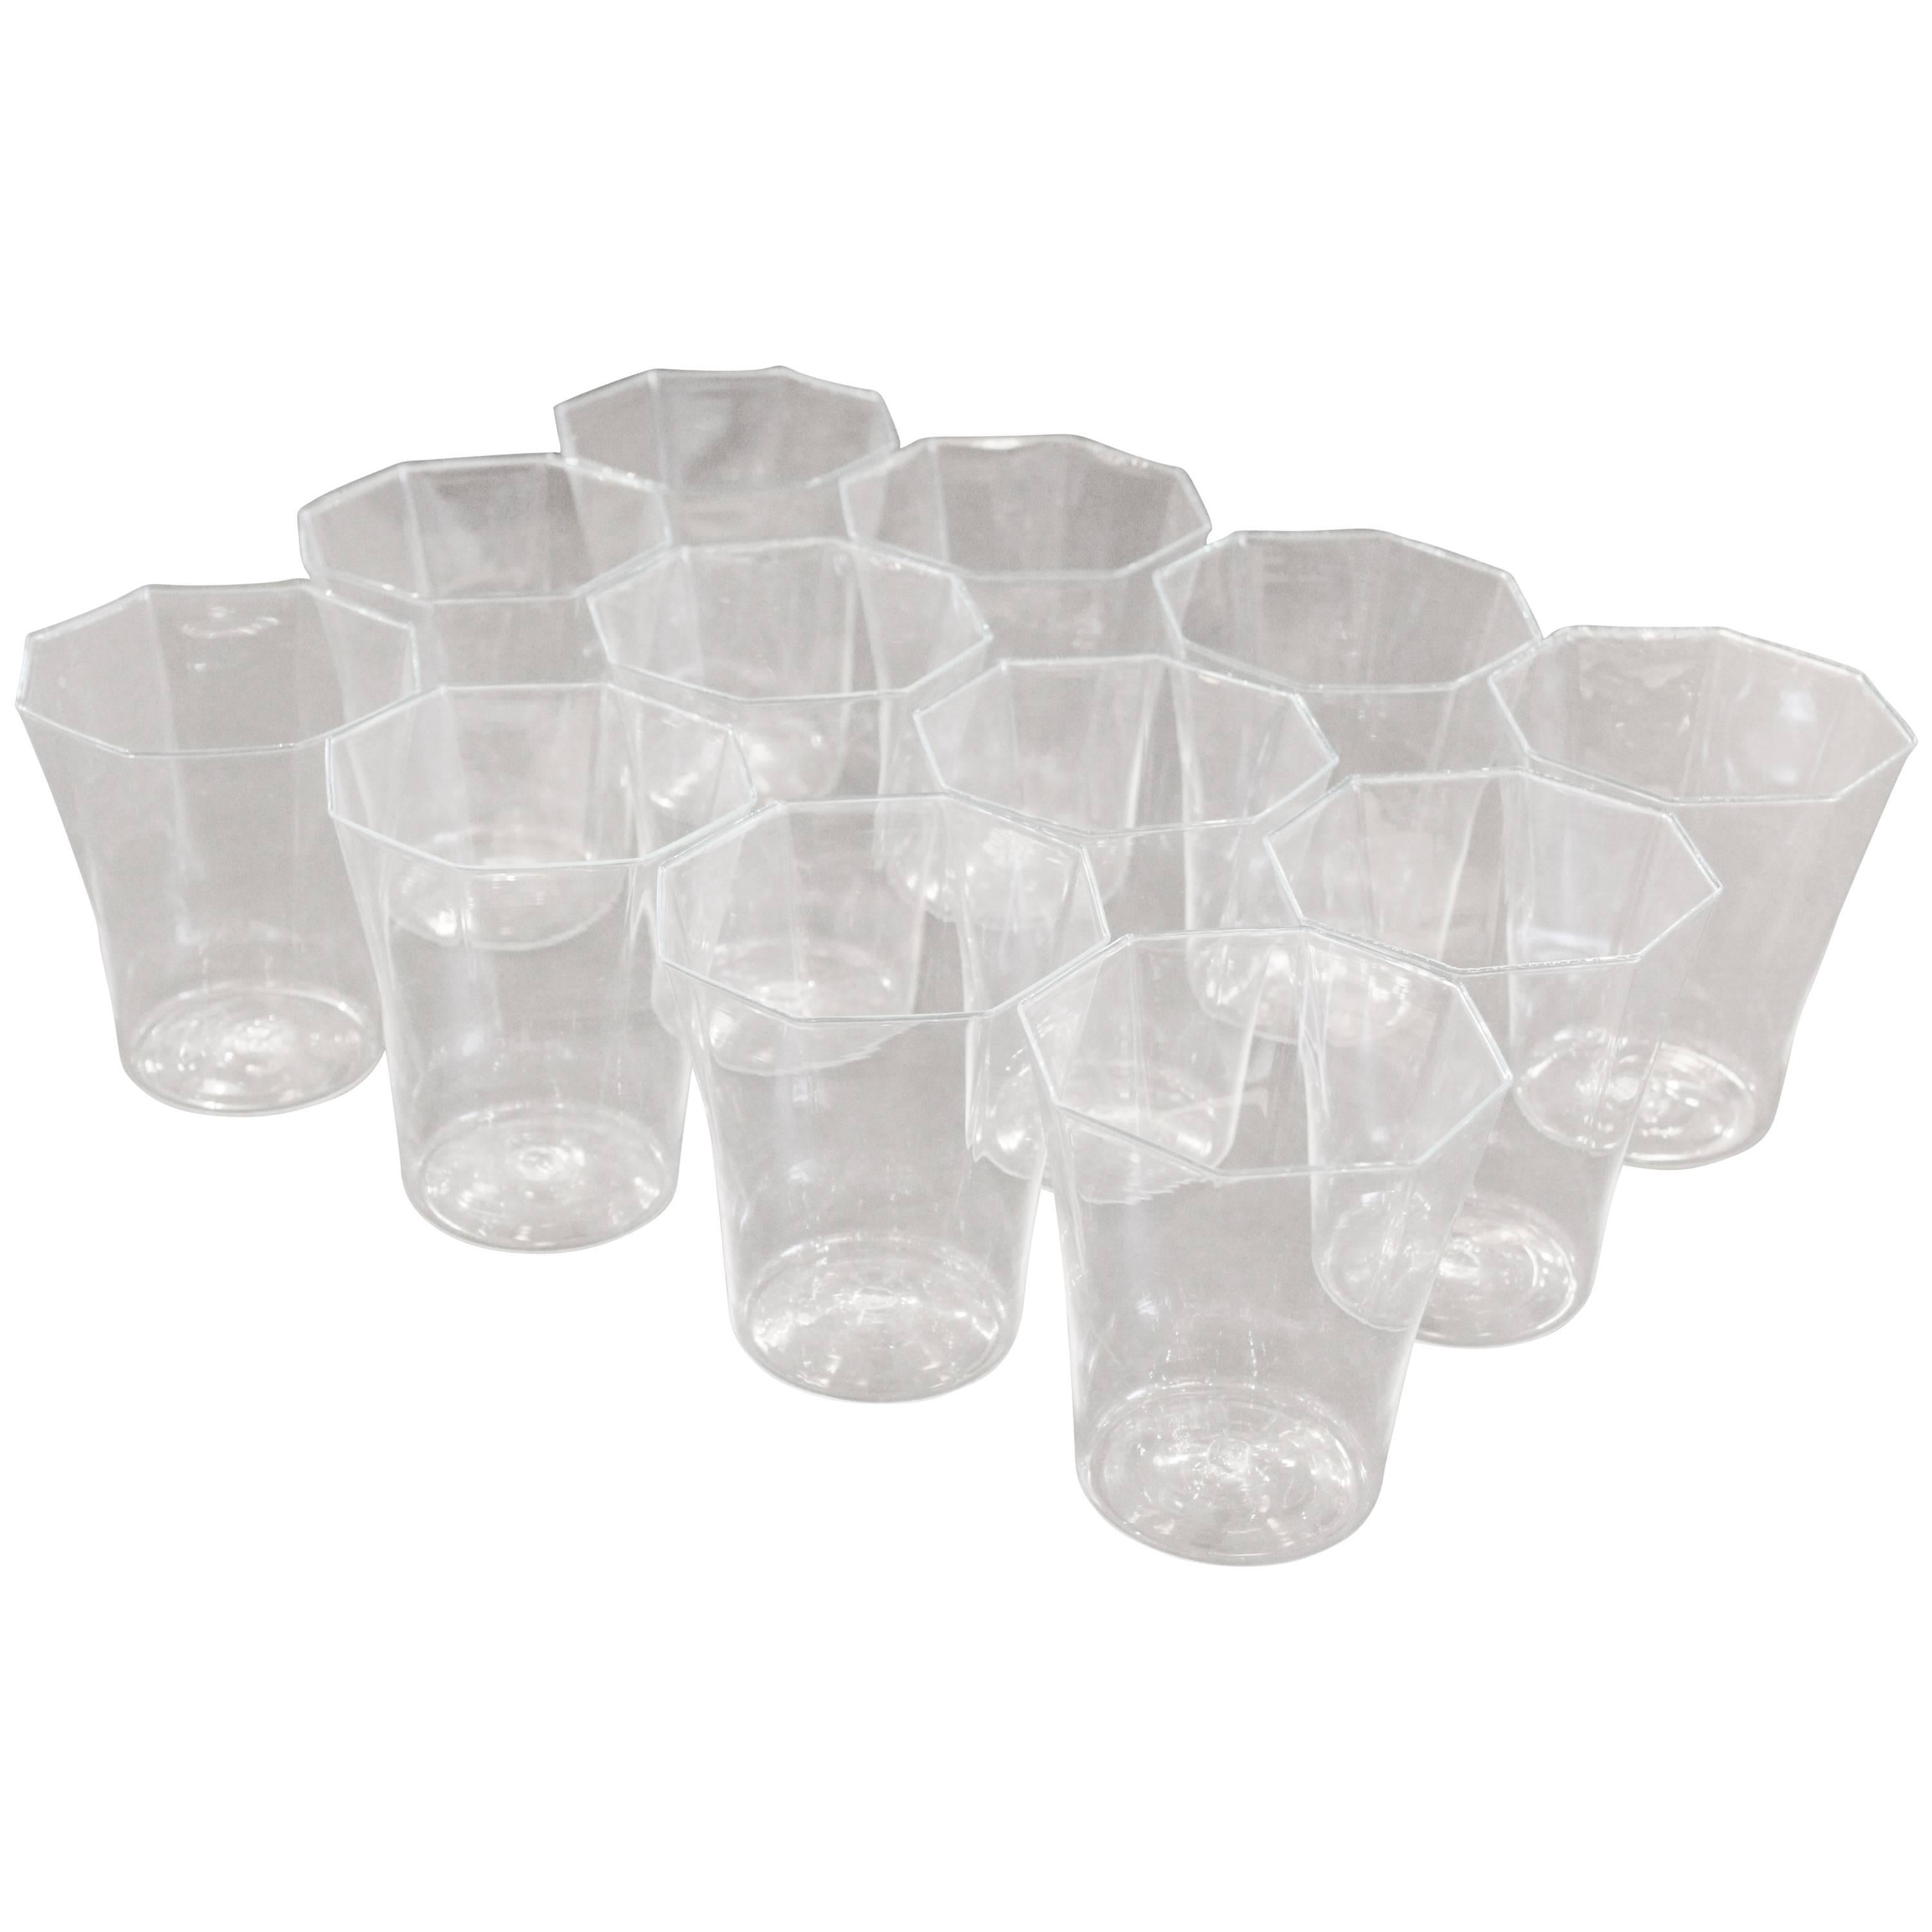 Set of 12 Large Murano Glasses from the 1930s